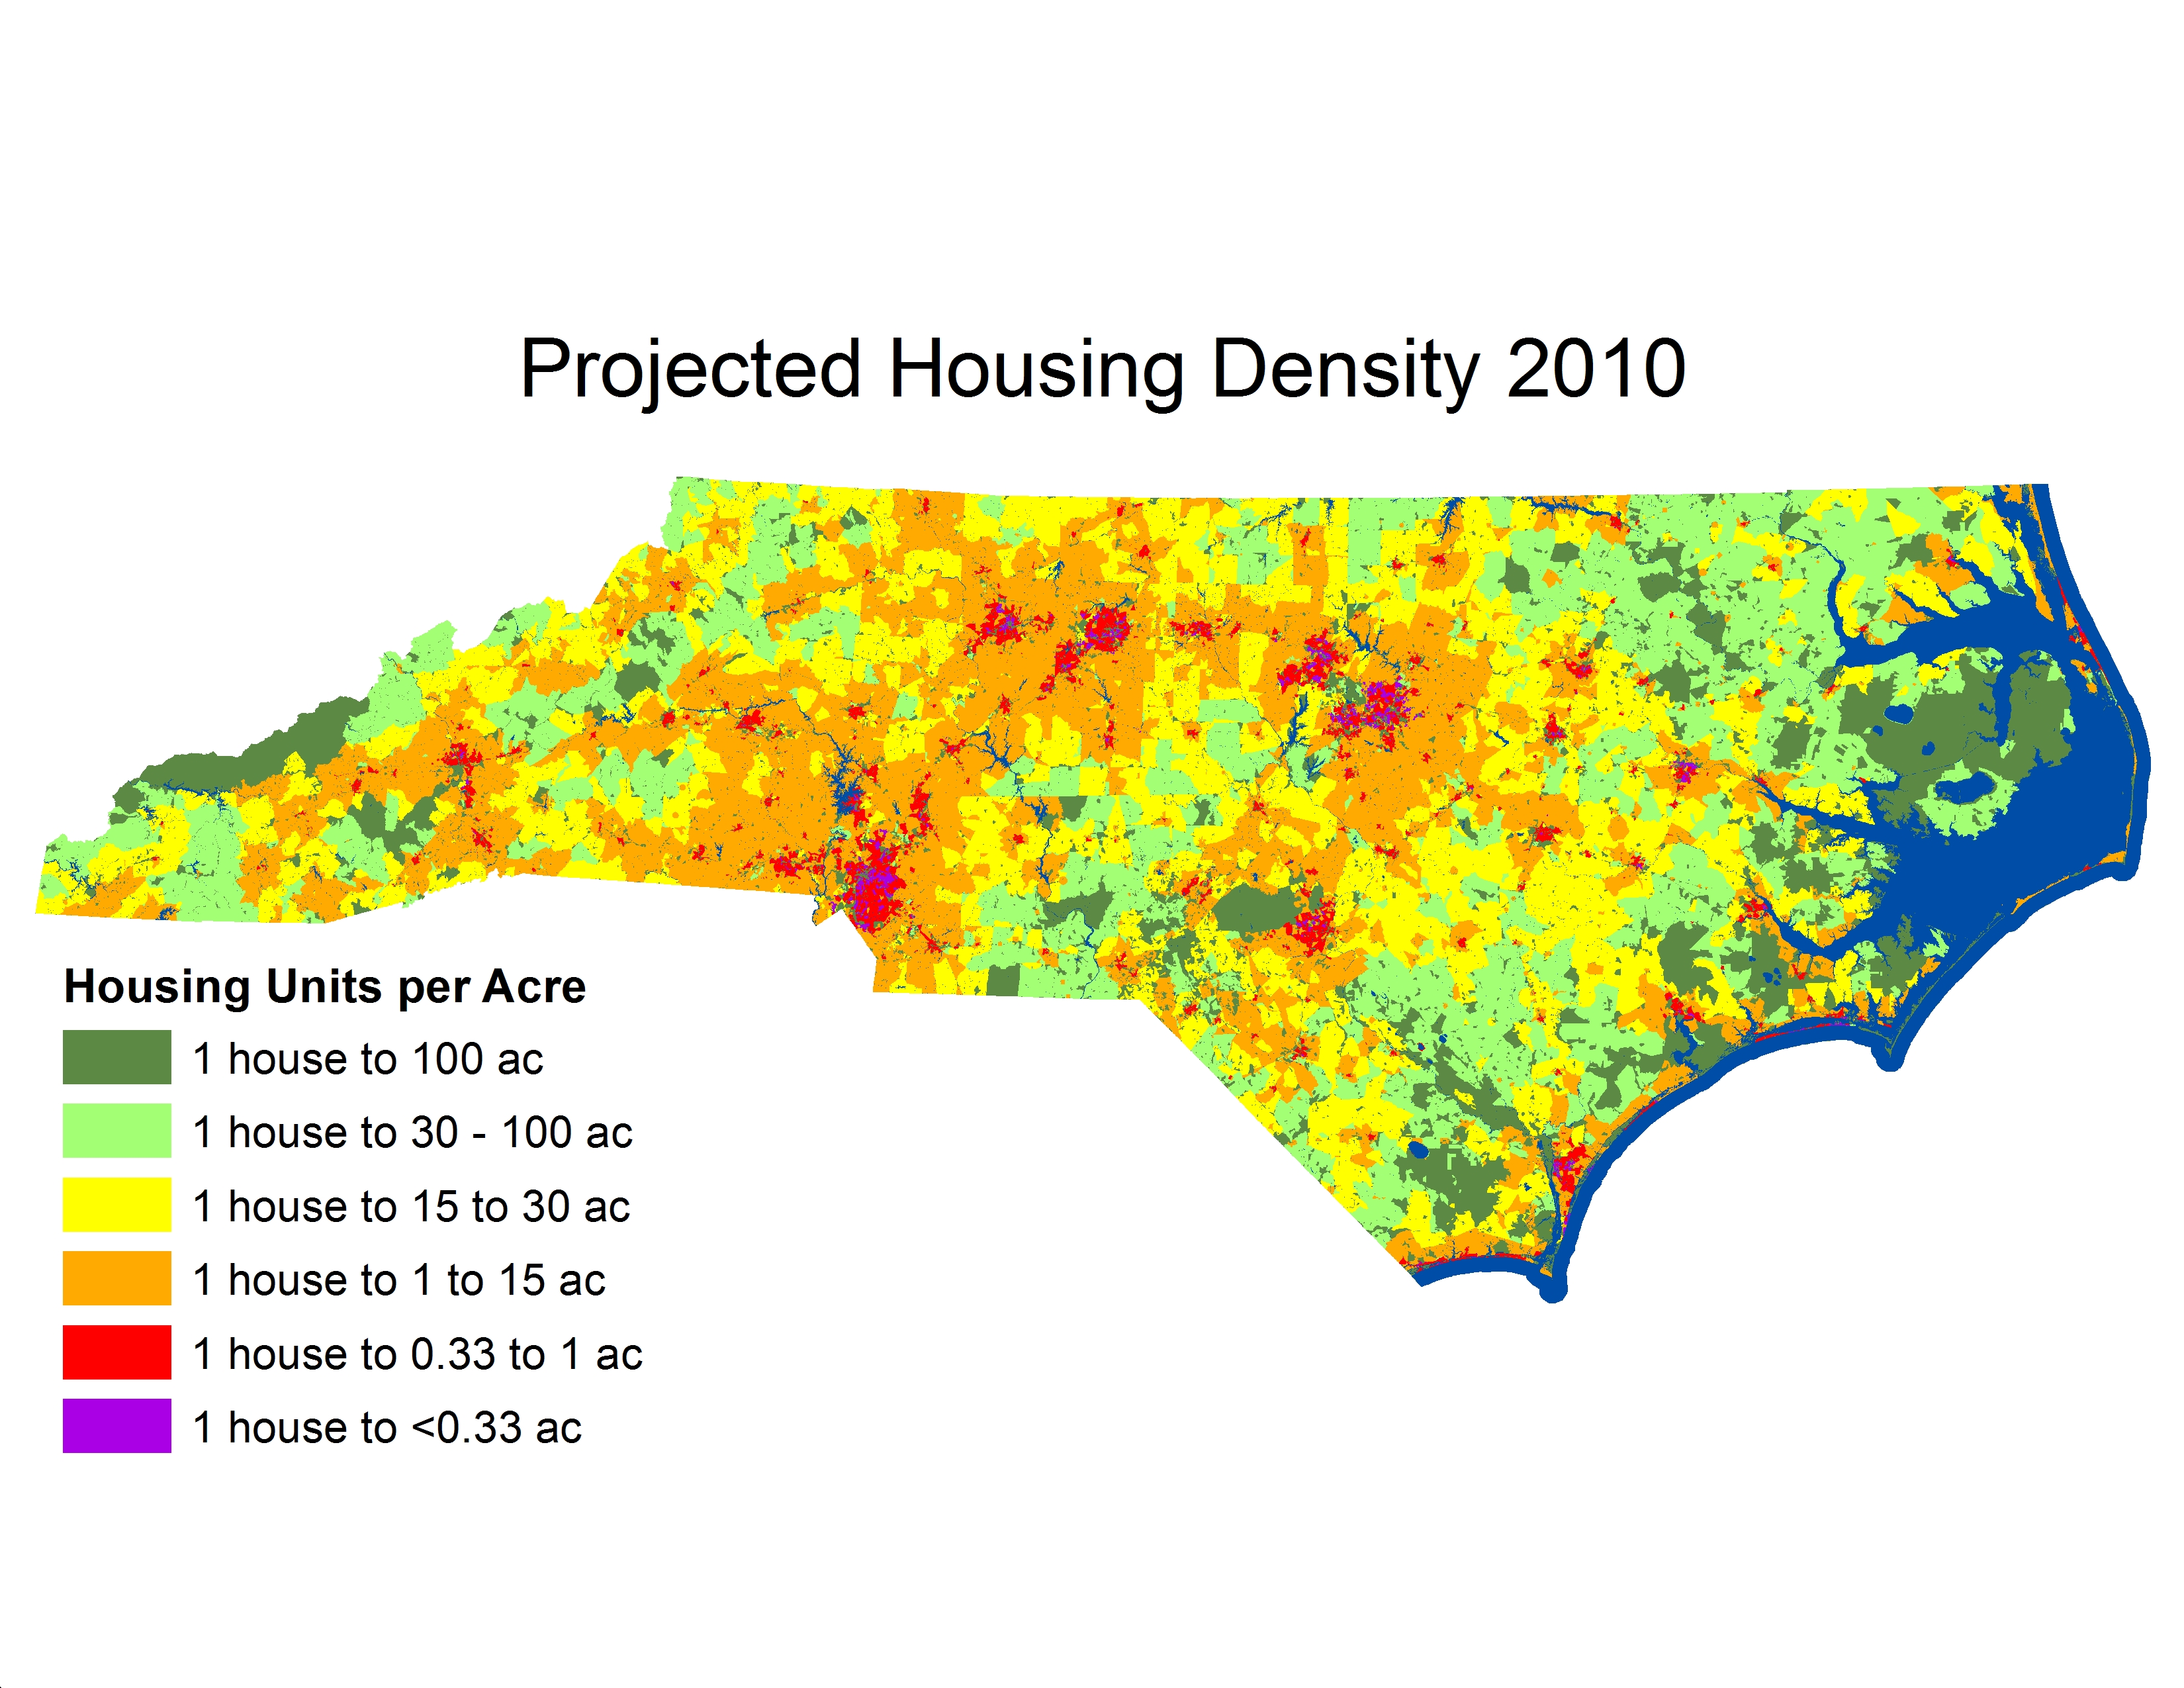 Projected housing density in 2010 matches actual 2010 housing density.